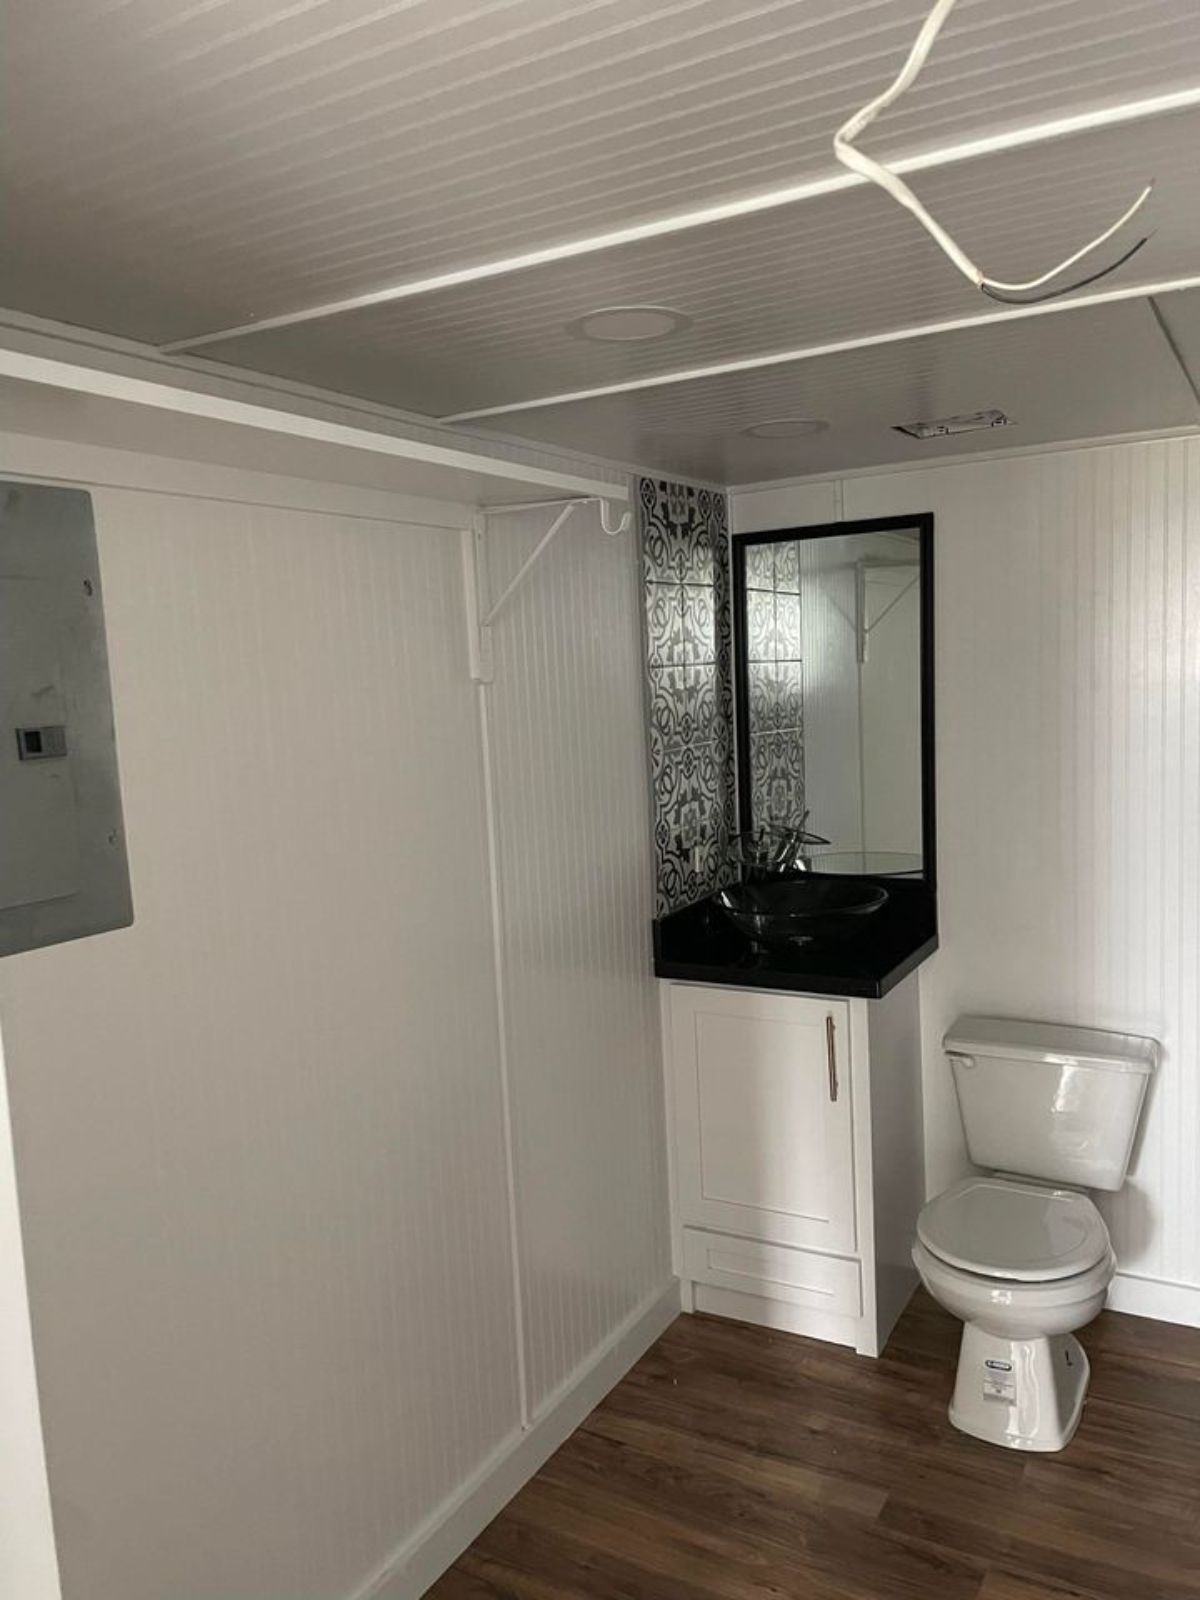 Toilet of 29' Long Luxury Tiny Home On Wheels